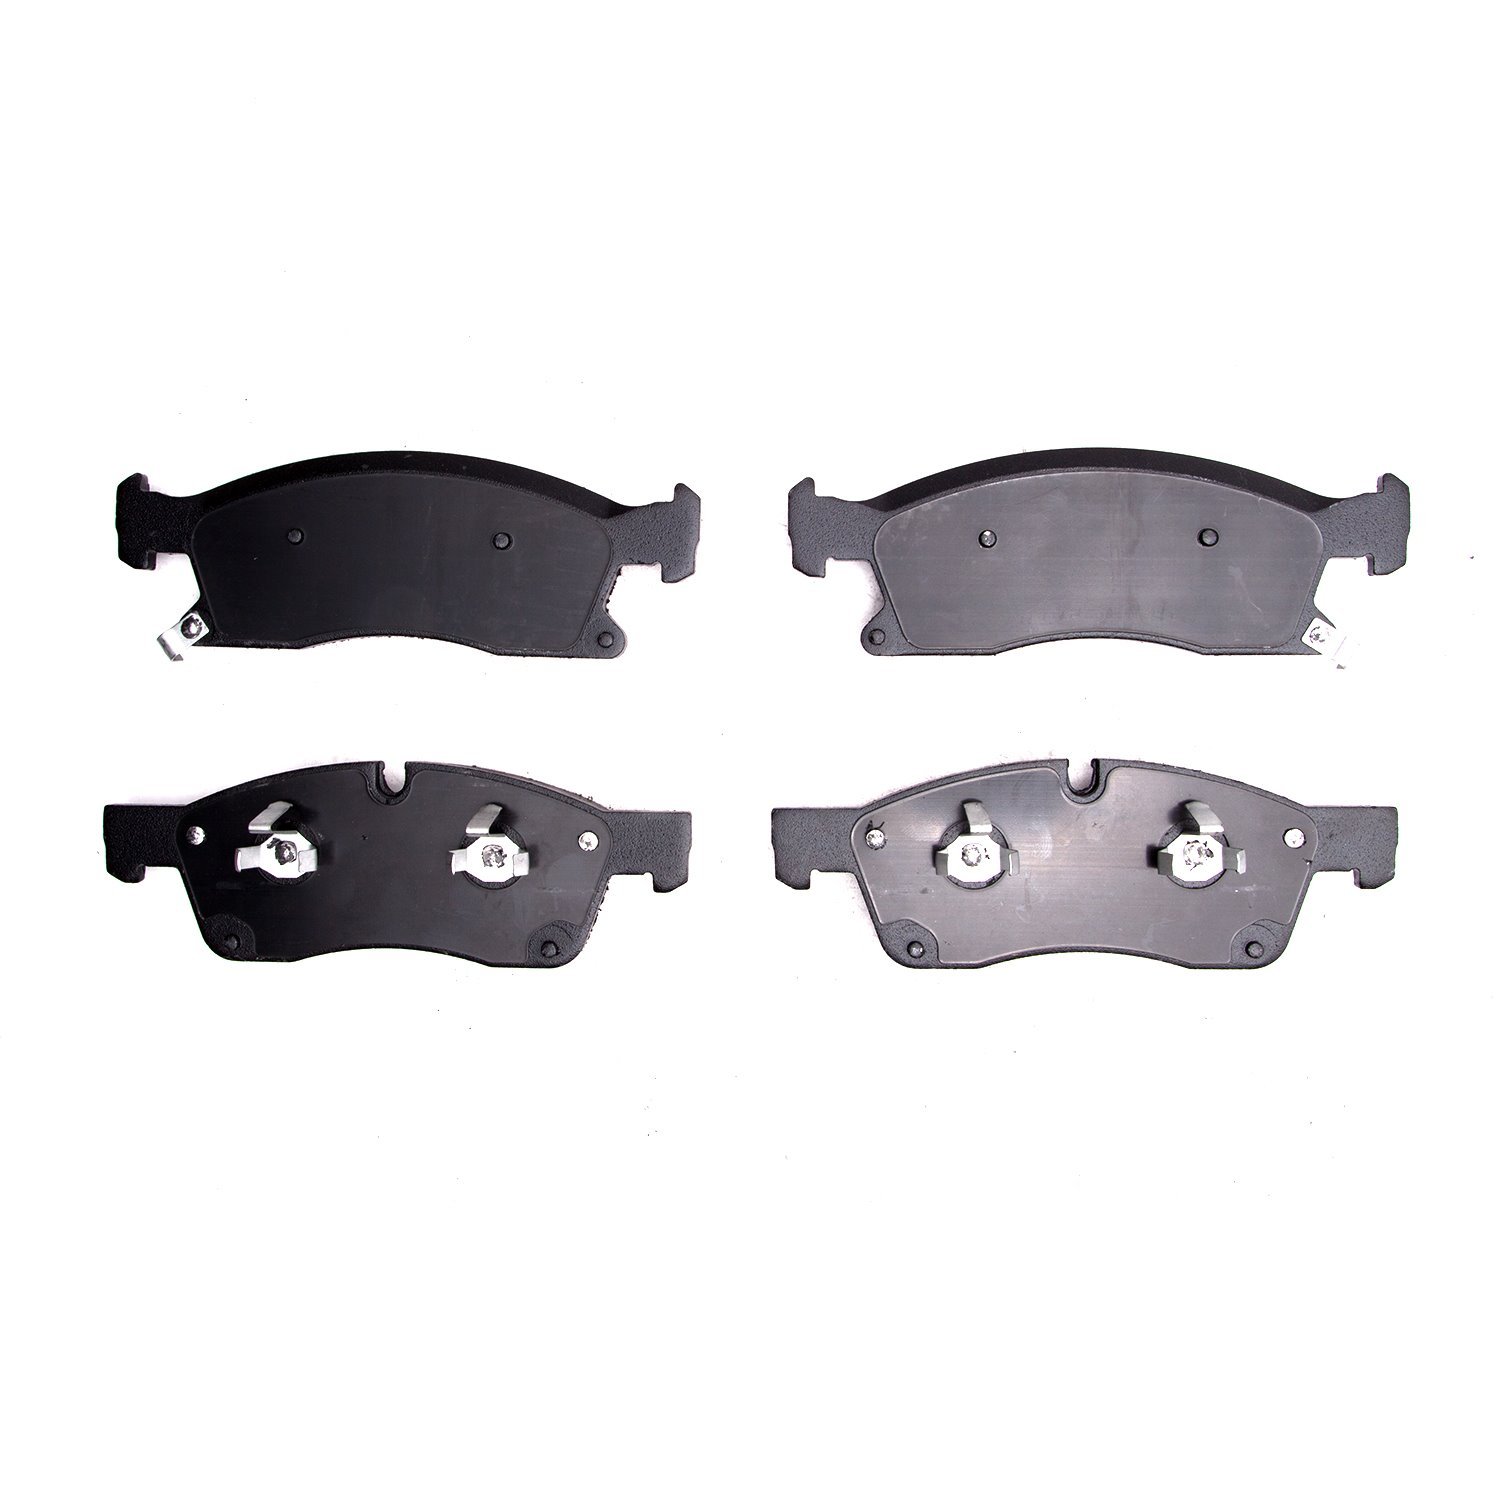 1310-1904-10 3000-Series Ceramic Brake Pads, Fits Select Multiple Makes/Models, Position: Front